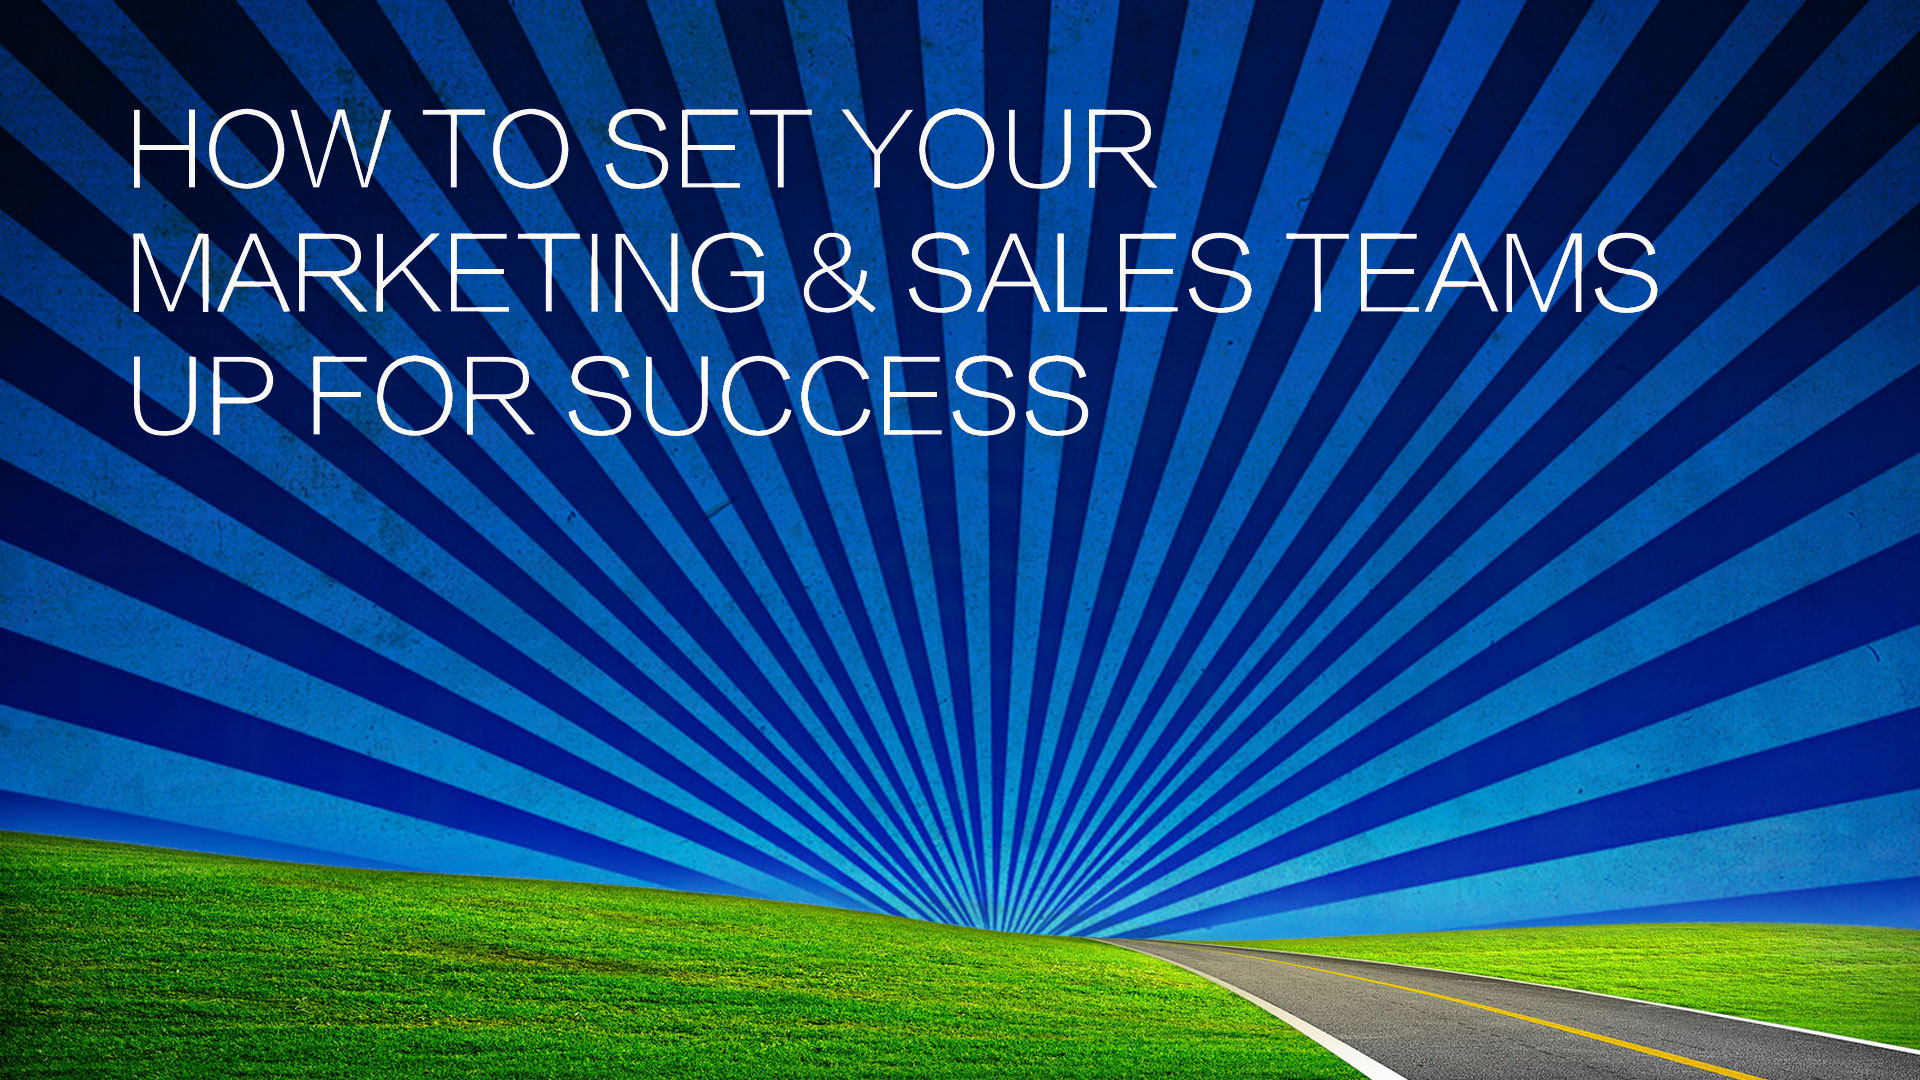 How to set your marketing sales teams up for success